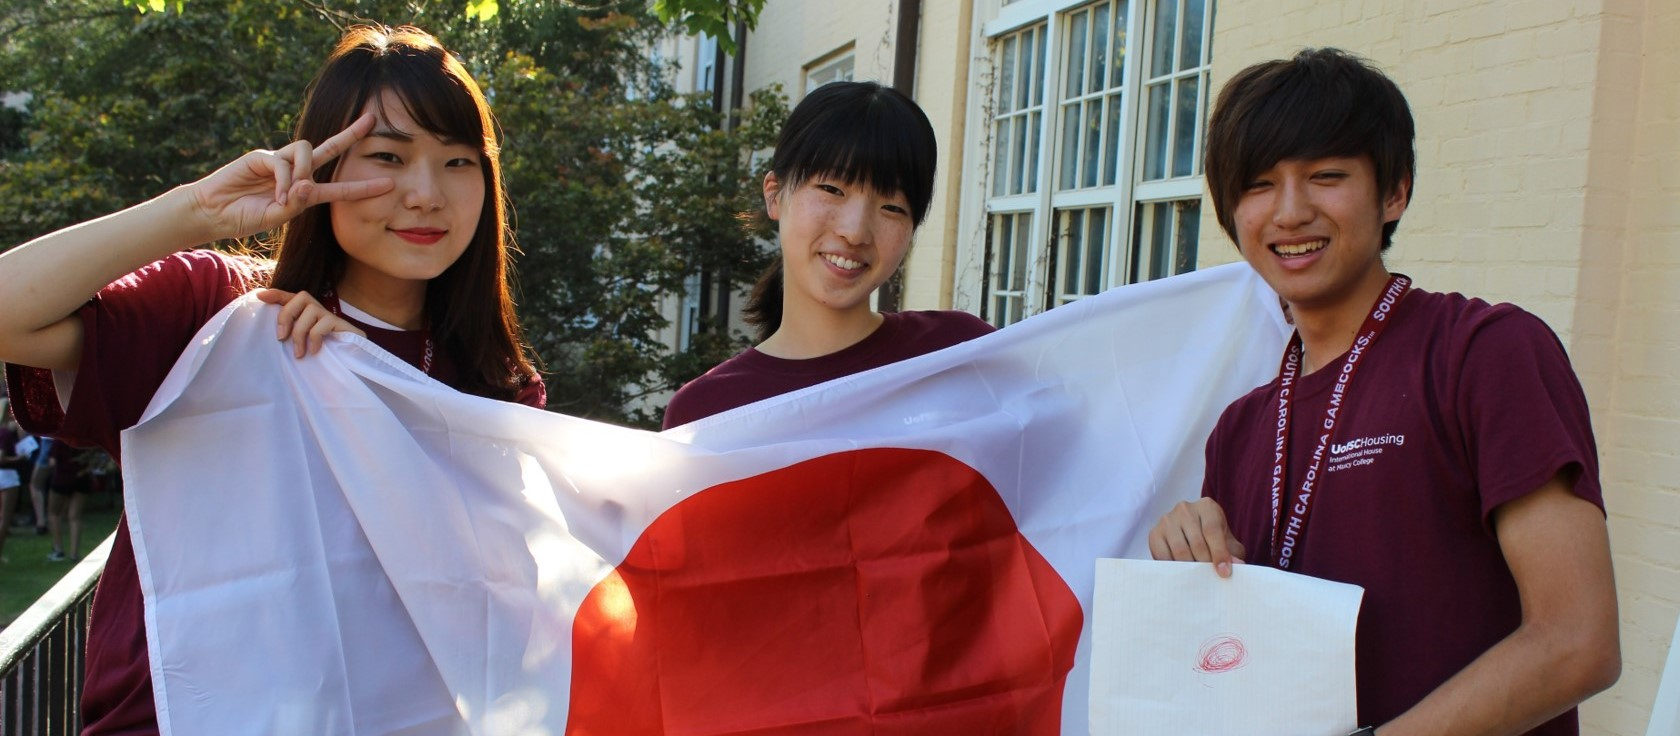 Japanese students with their flag